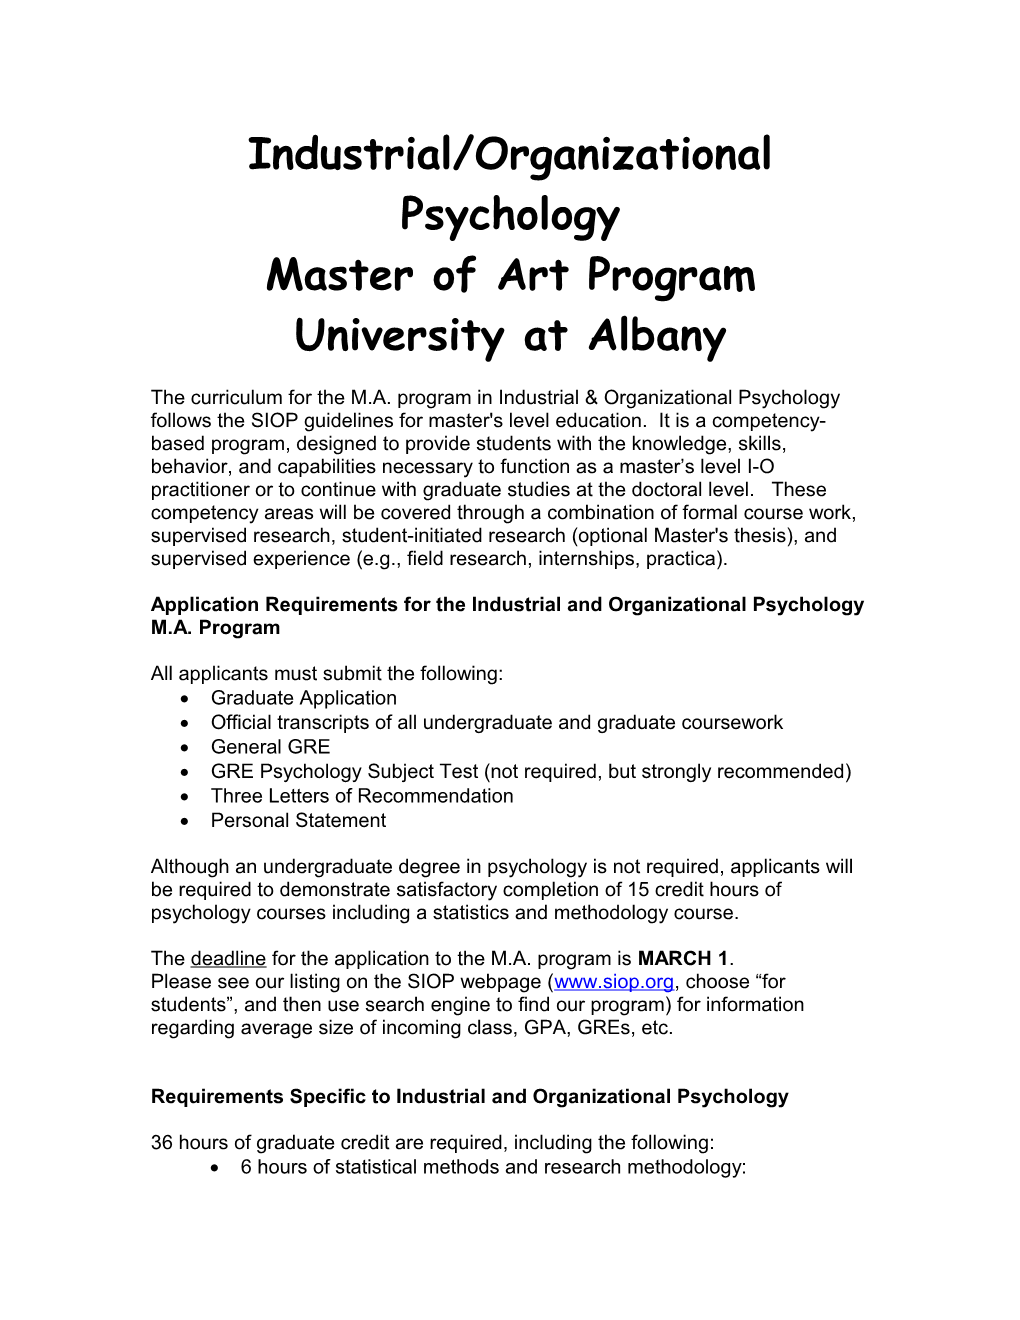 Requirements Specific to Industrial and Organizational Psychology s1